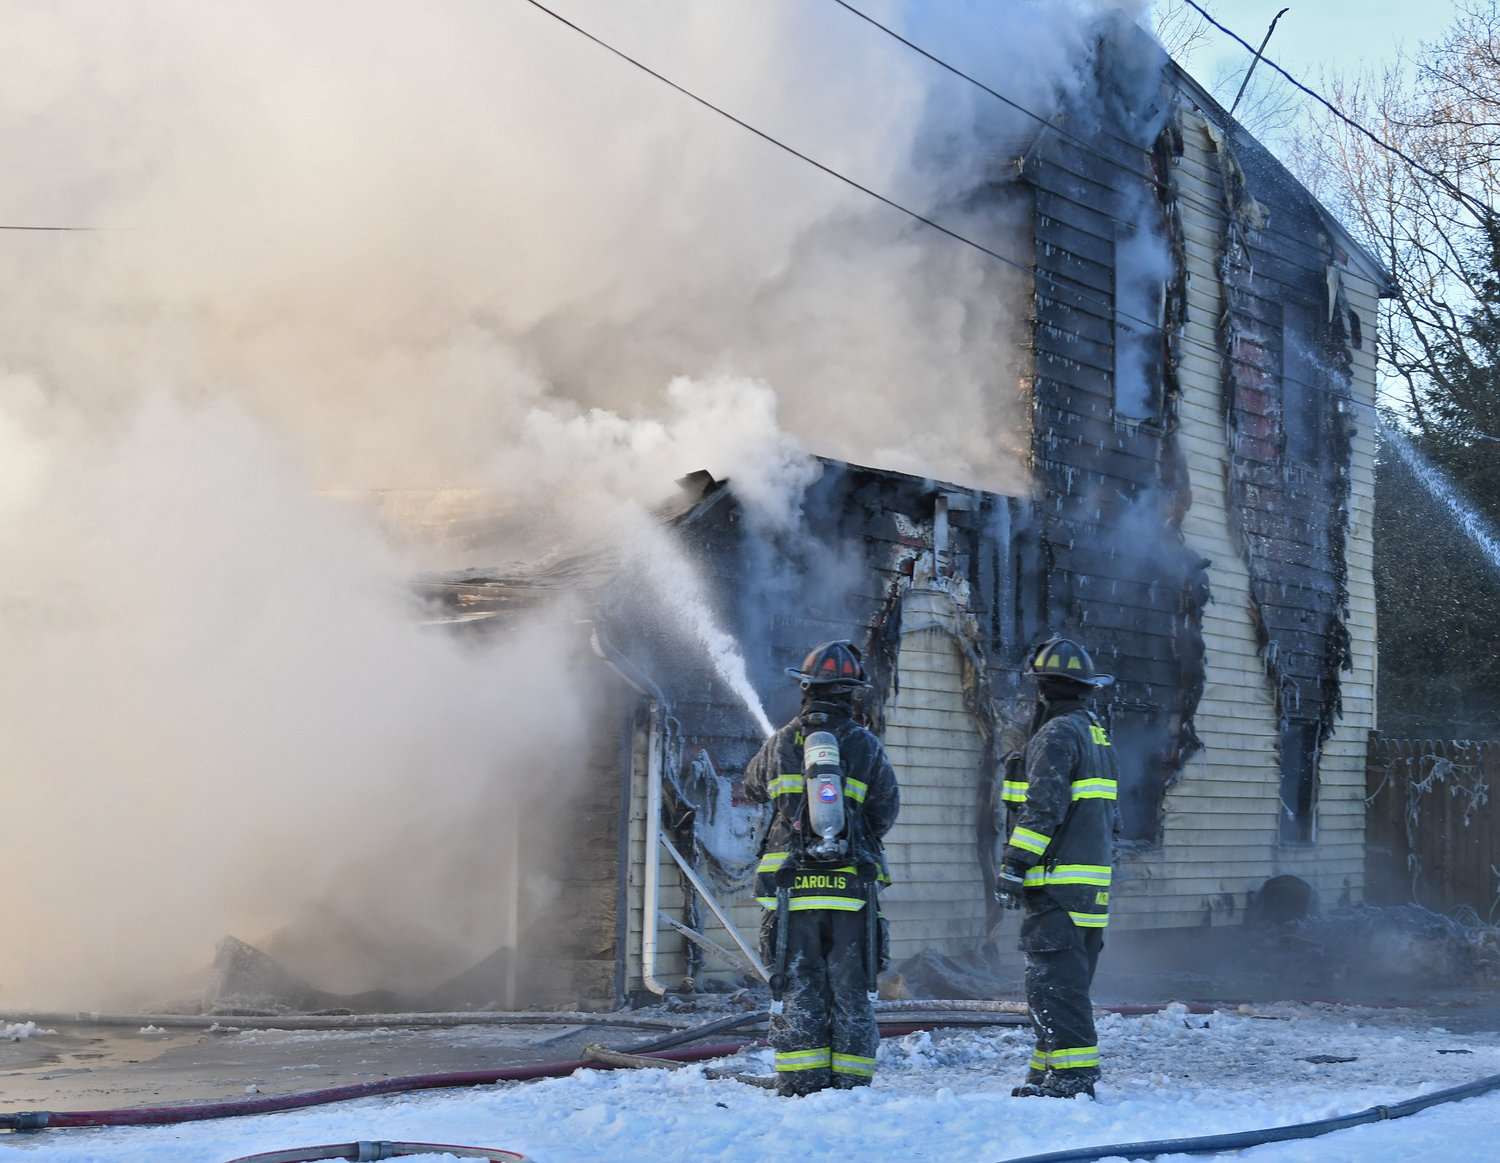 NO FOUL PLAY — Rome firefighters battle the early morning blaze at 1715 N. James St. on Saturday. Fire officials said the sole resident, an 83-year-old woman, perished in the fire. The cause remains under investigation.